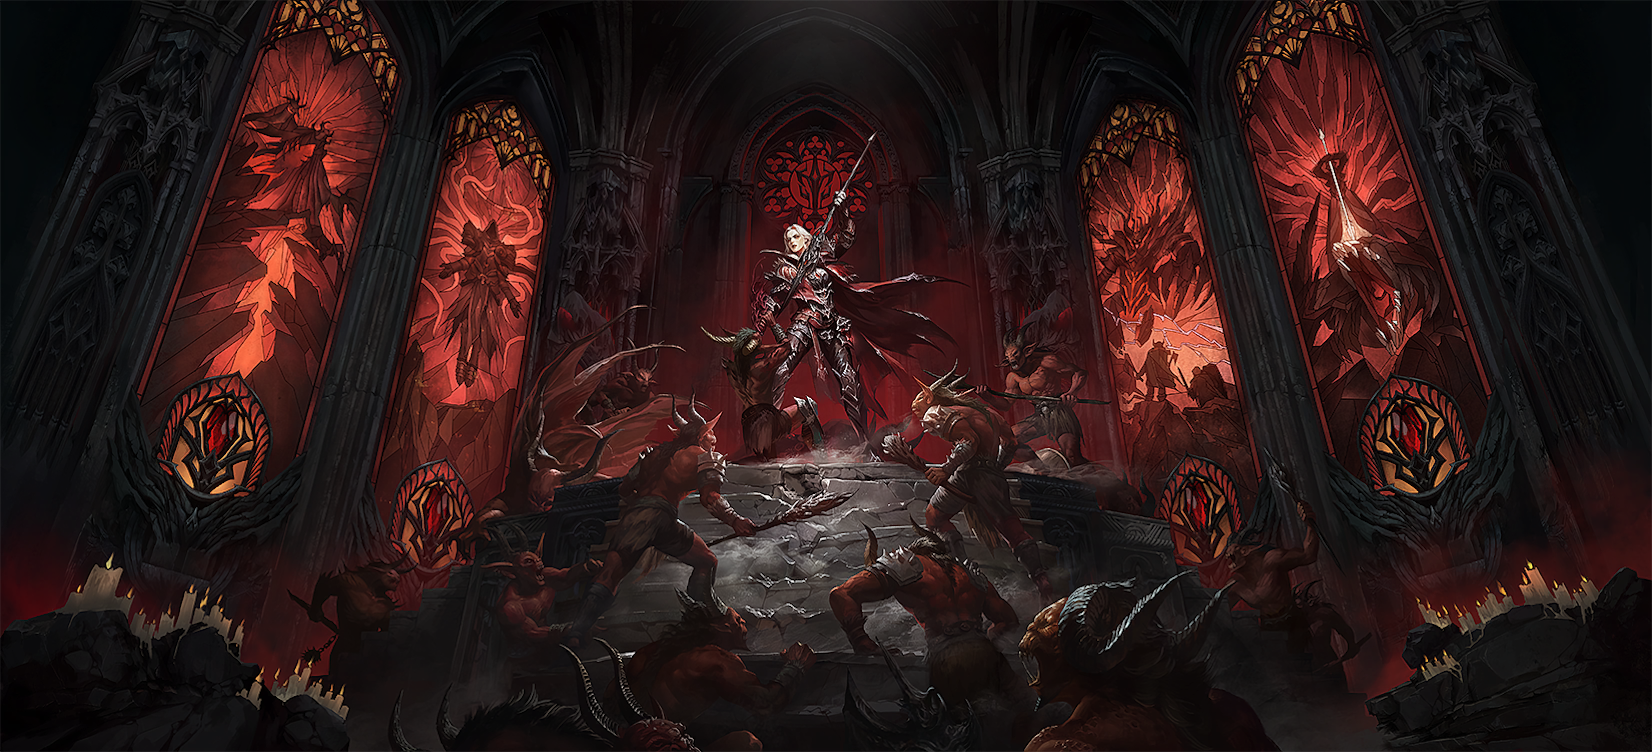 Should Diablo 4 also get the new Blood Knight Class?